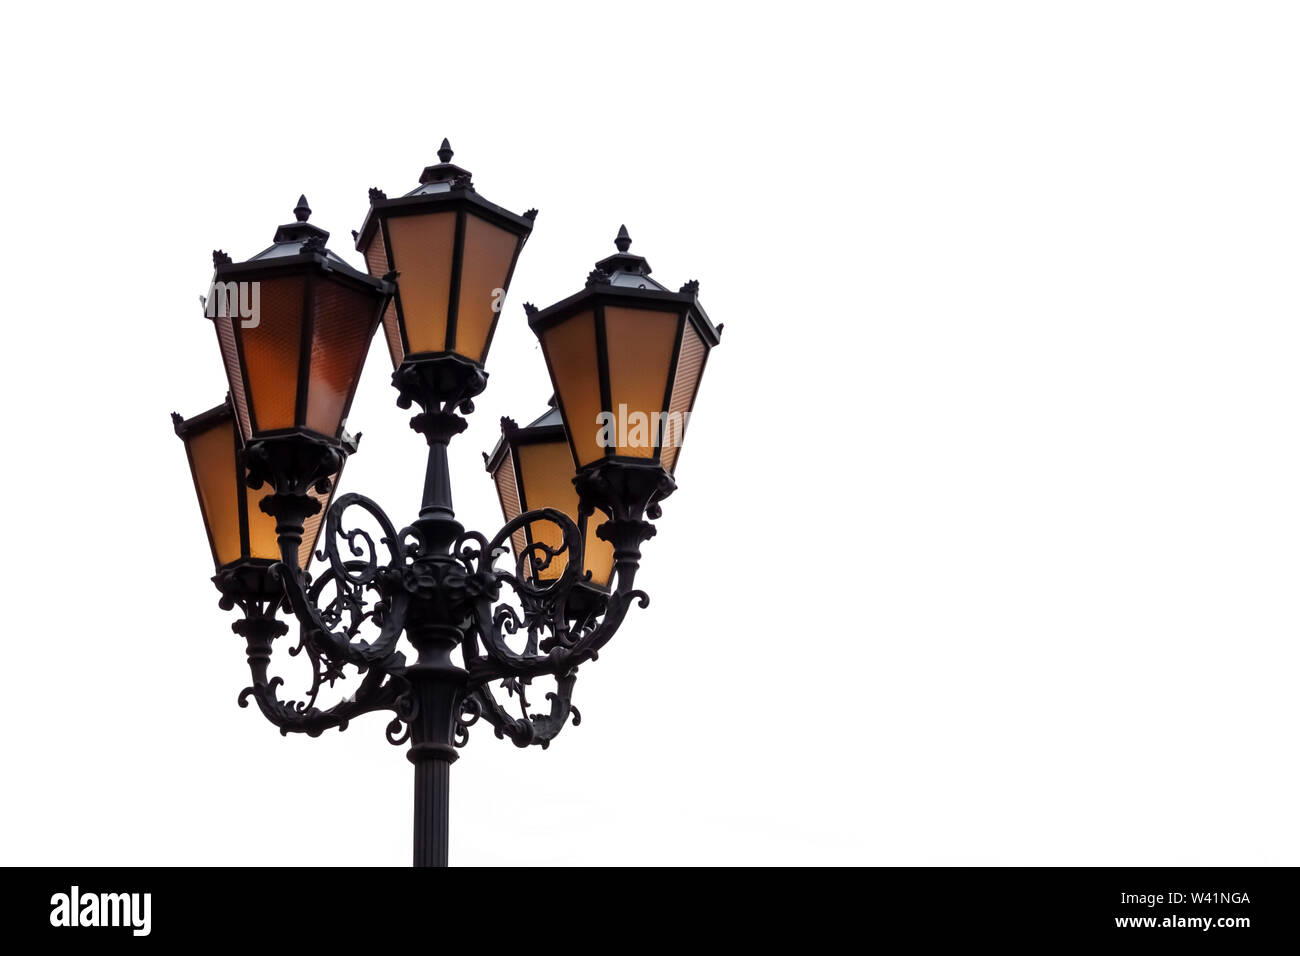 Street lamps, made in the old style. Stock Photo